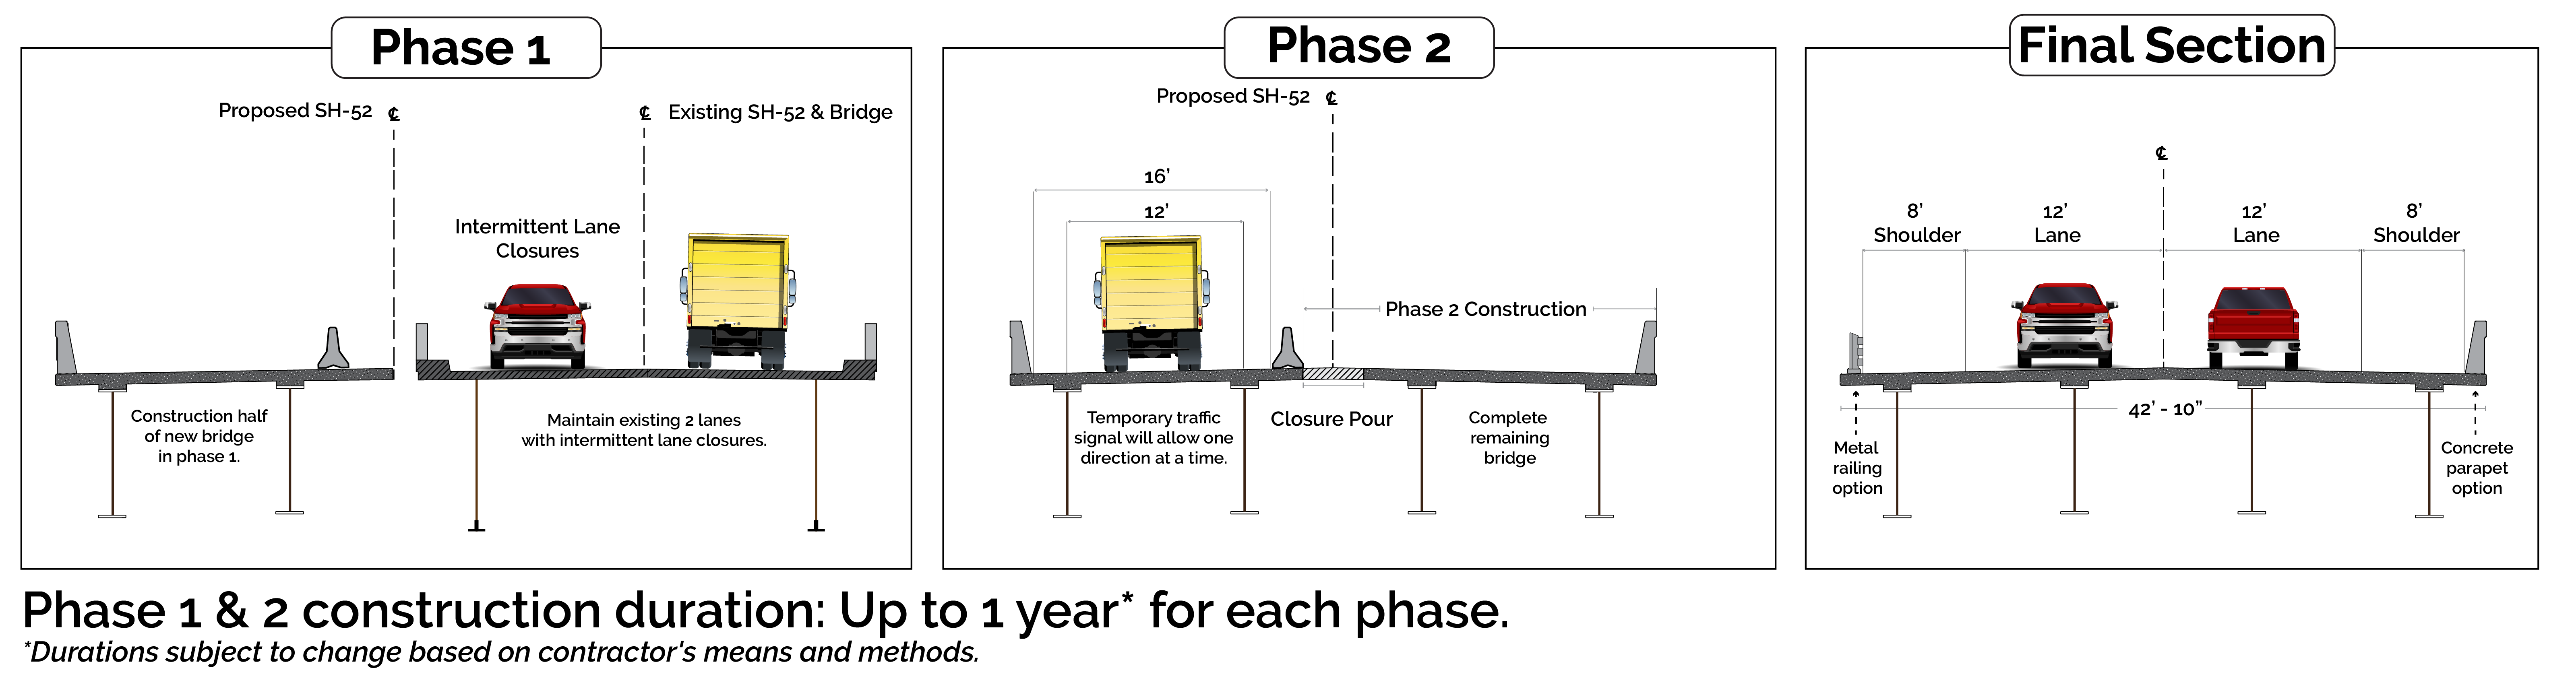 Typical sections of Phase 1, 2 and Final section of the bridge detailing where lanes will be designated as the bridge is expanded during construction.